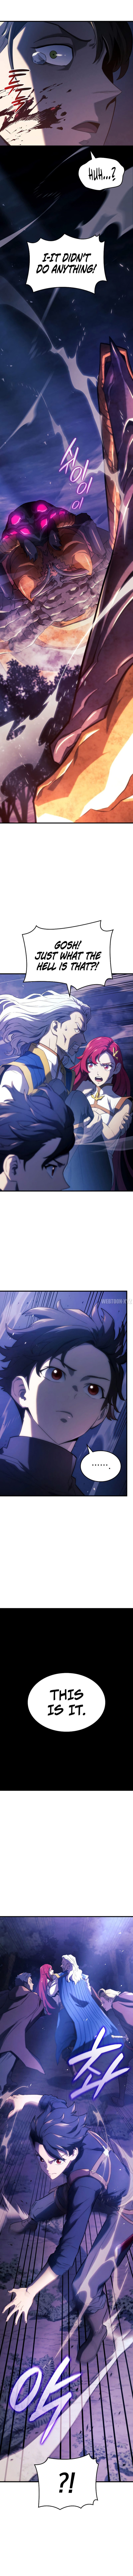 revenge-of-the-iron-blooded-sword-hound-chap-31-7